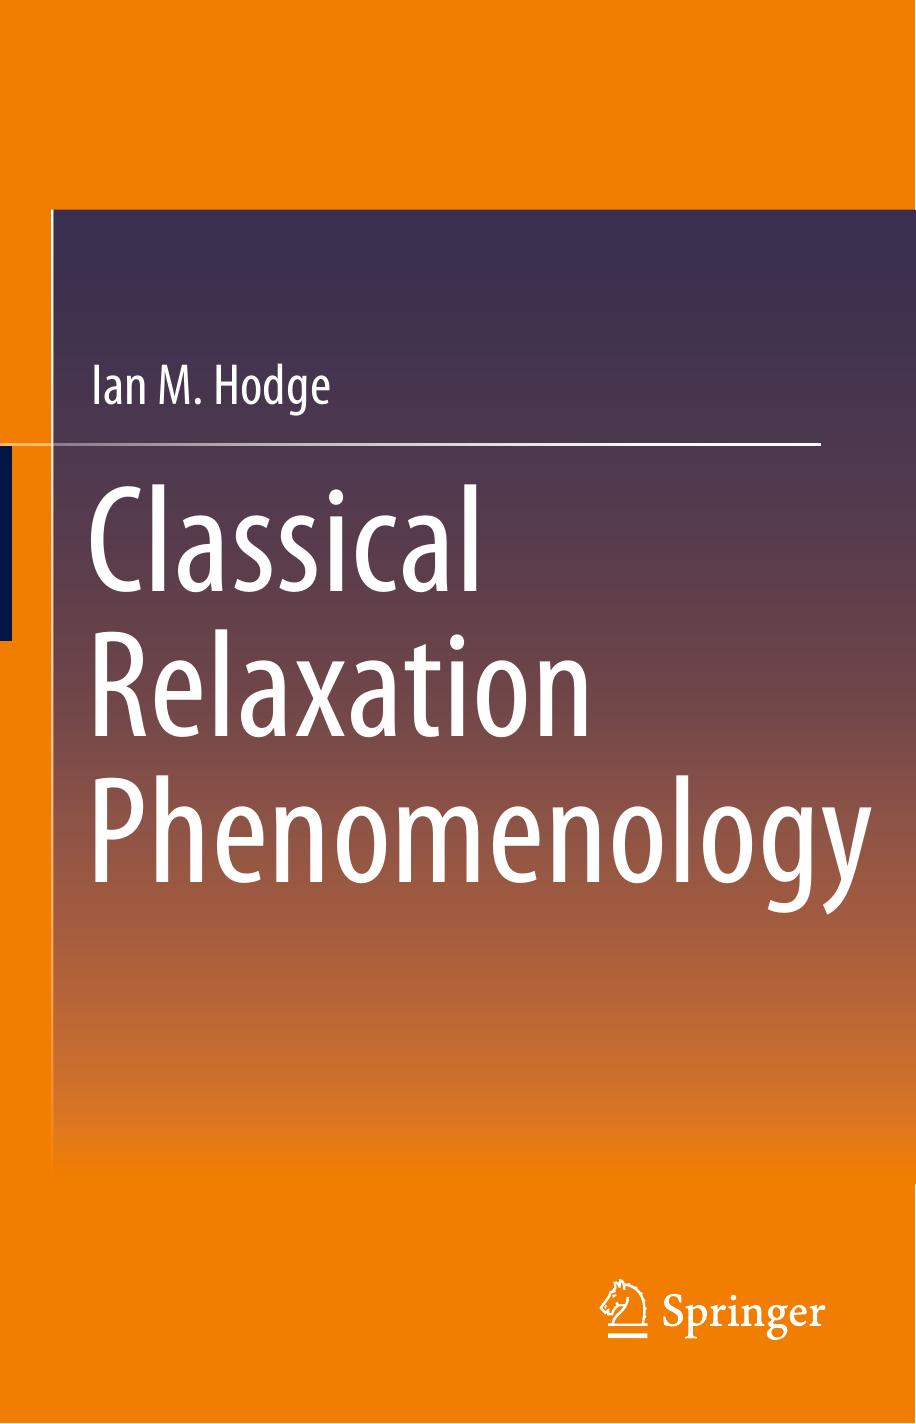 Classical Relaxation Phenomenology by Ian M. Hodge